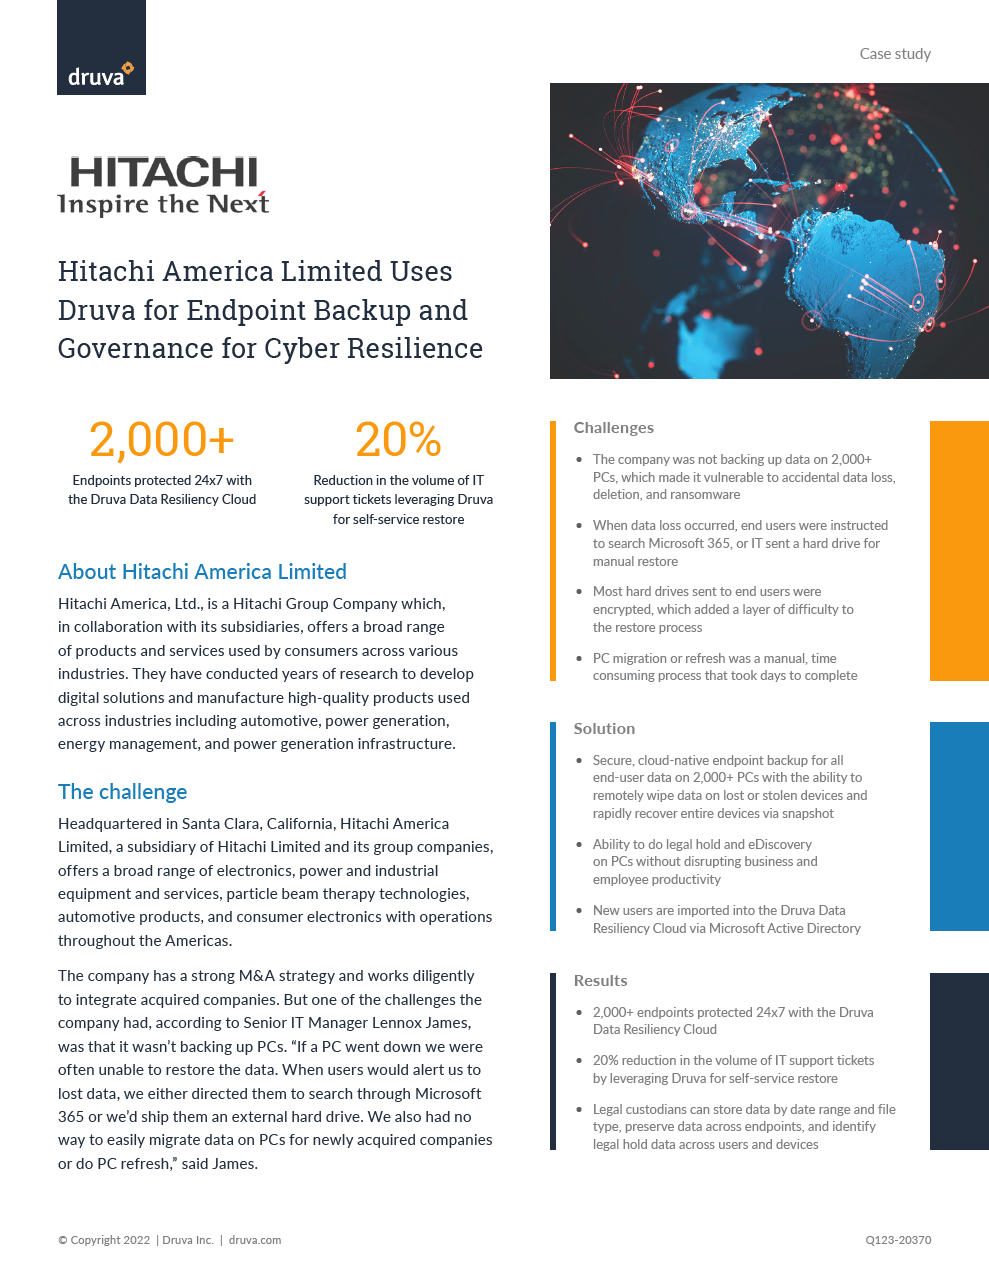 Hitachi America Limited Uses Druva for Endpoint Backup and Governance for Cyber Resilience